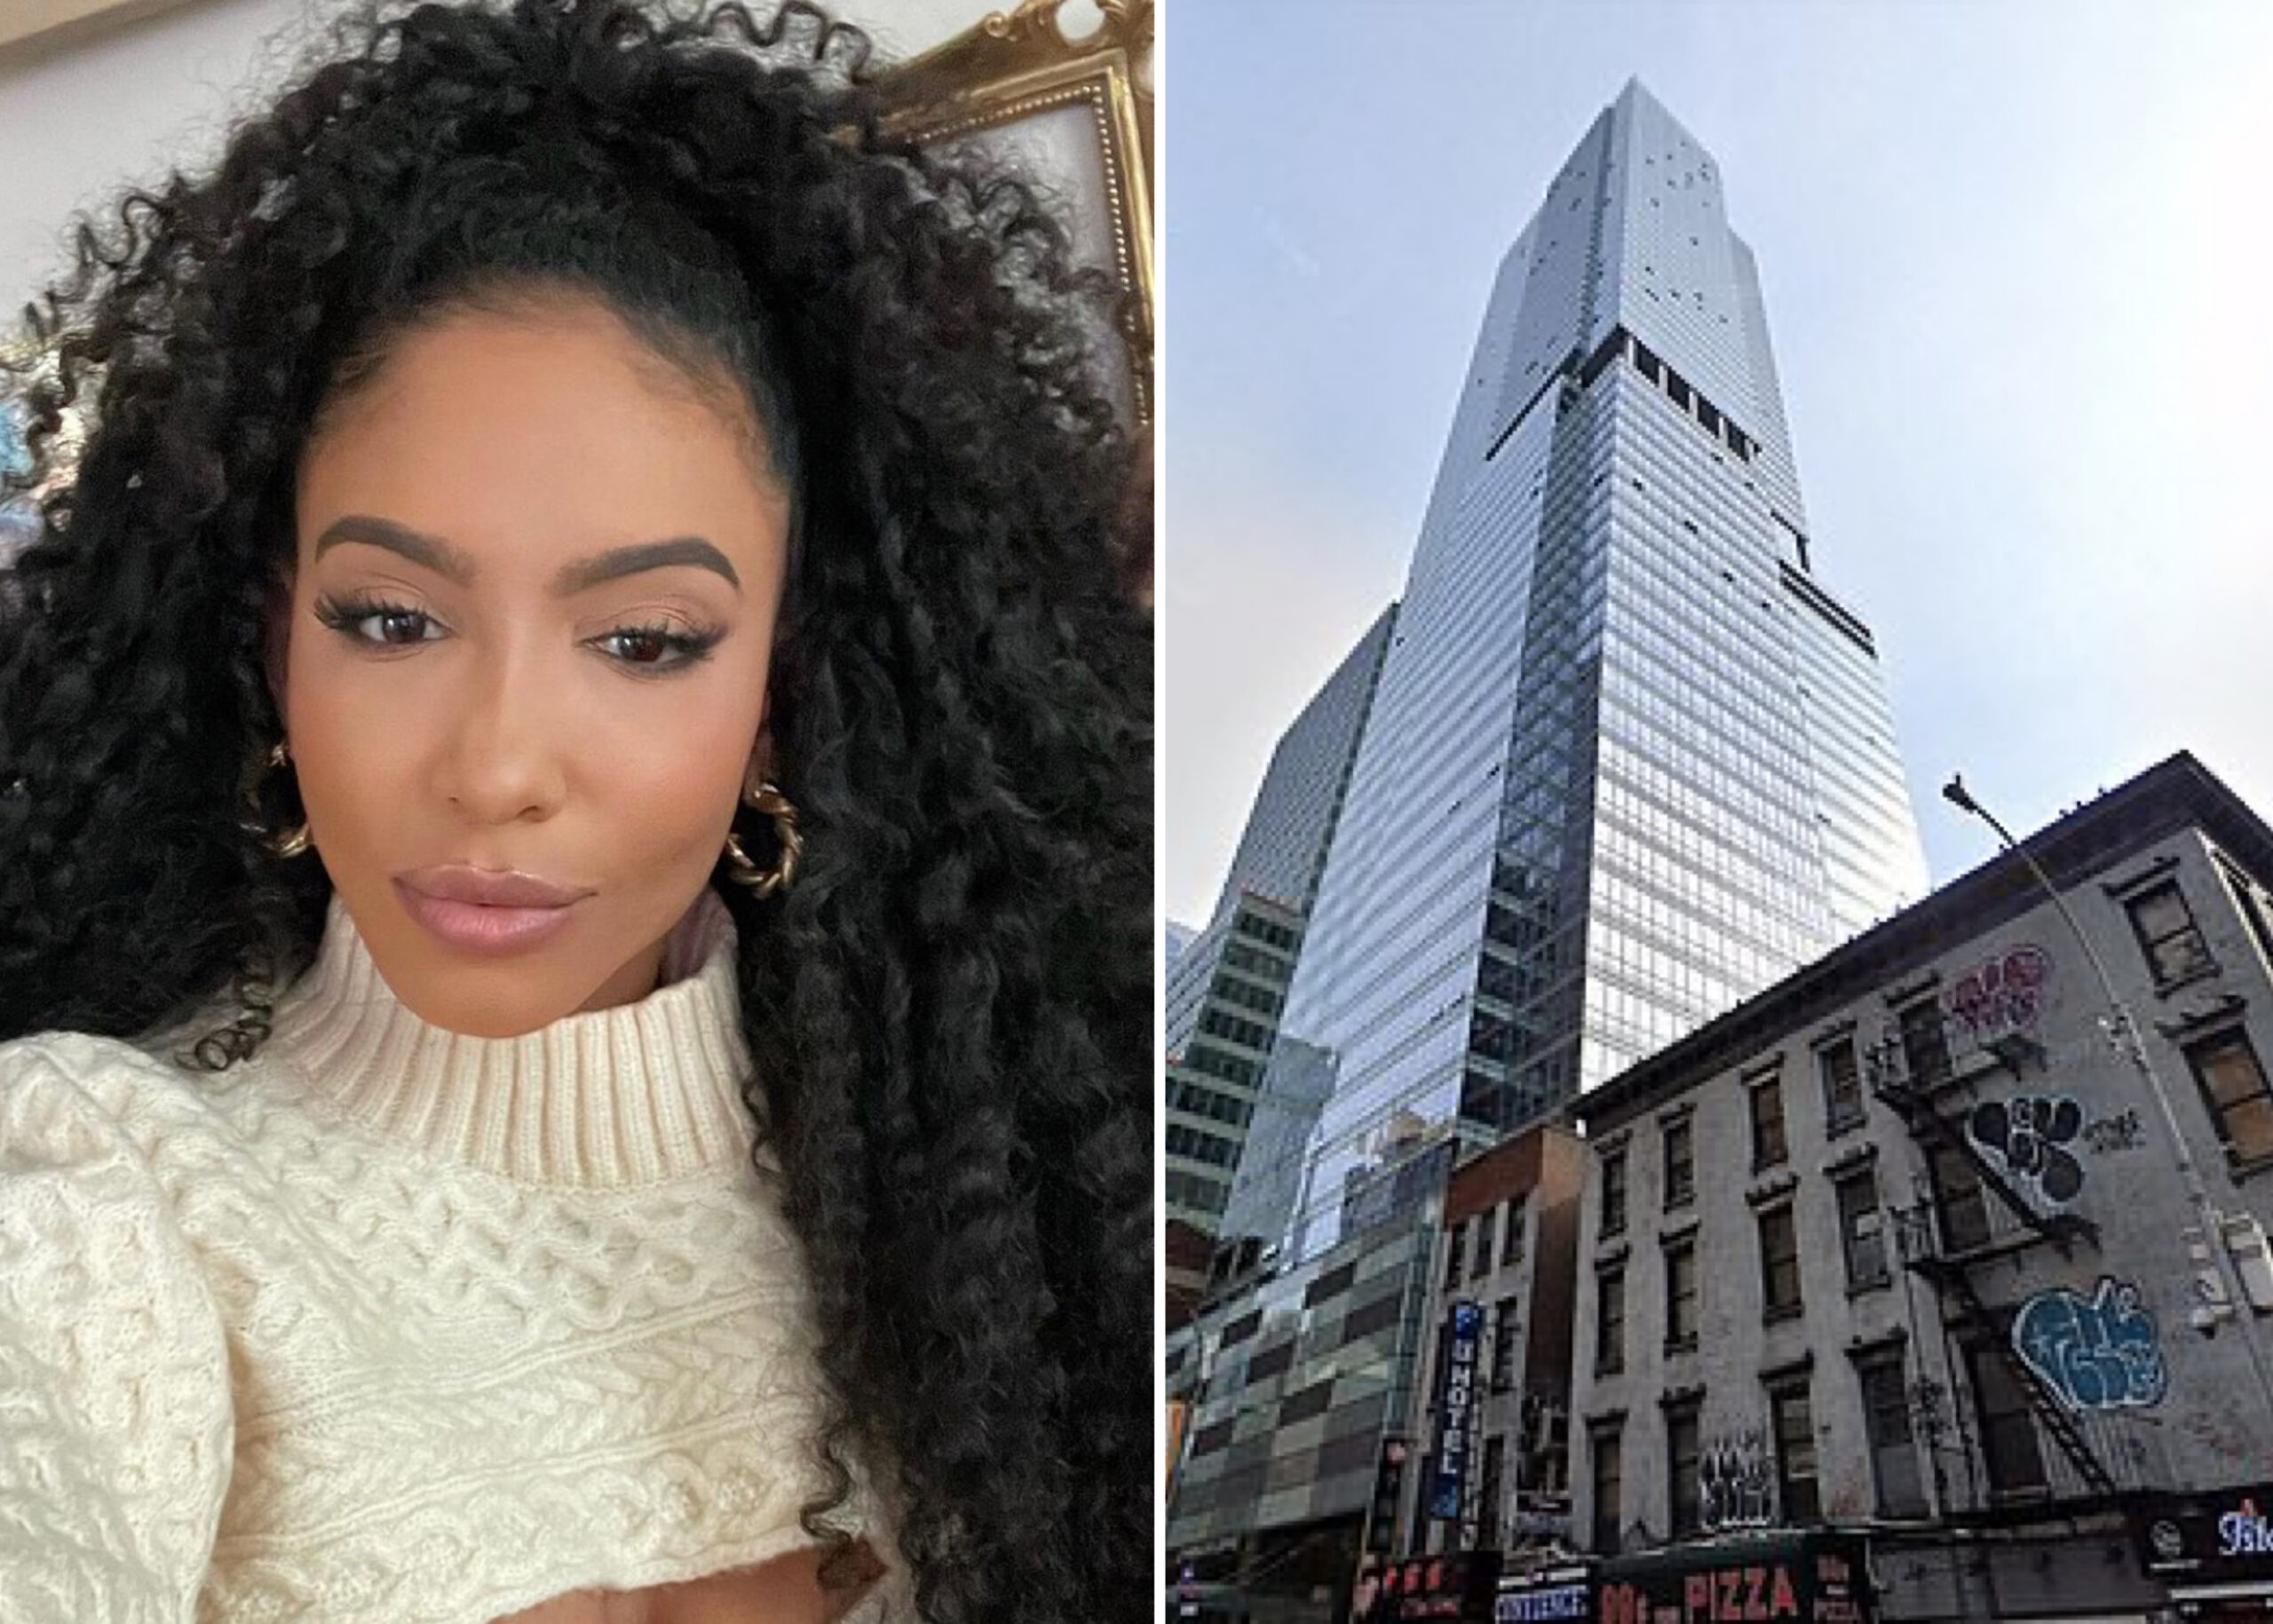 Miss USA 2019, Cheslie Kryst Jumps To Her Death From 60-Story Manhattan High-Rise